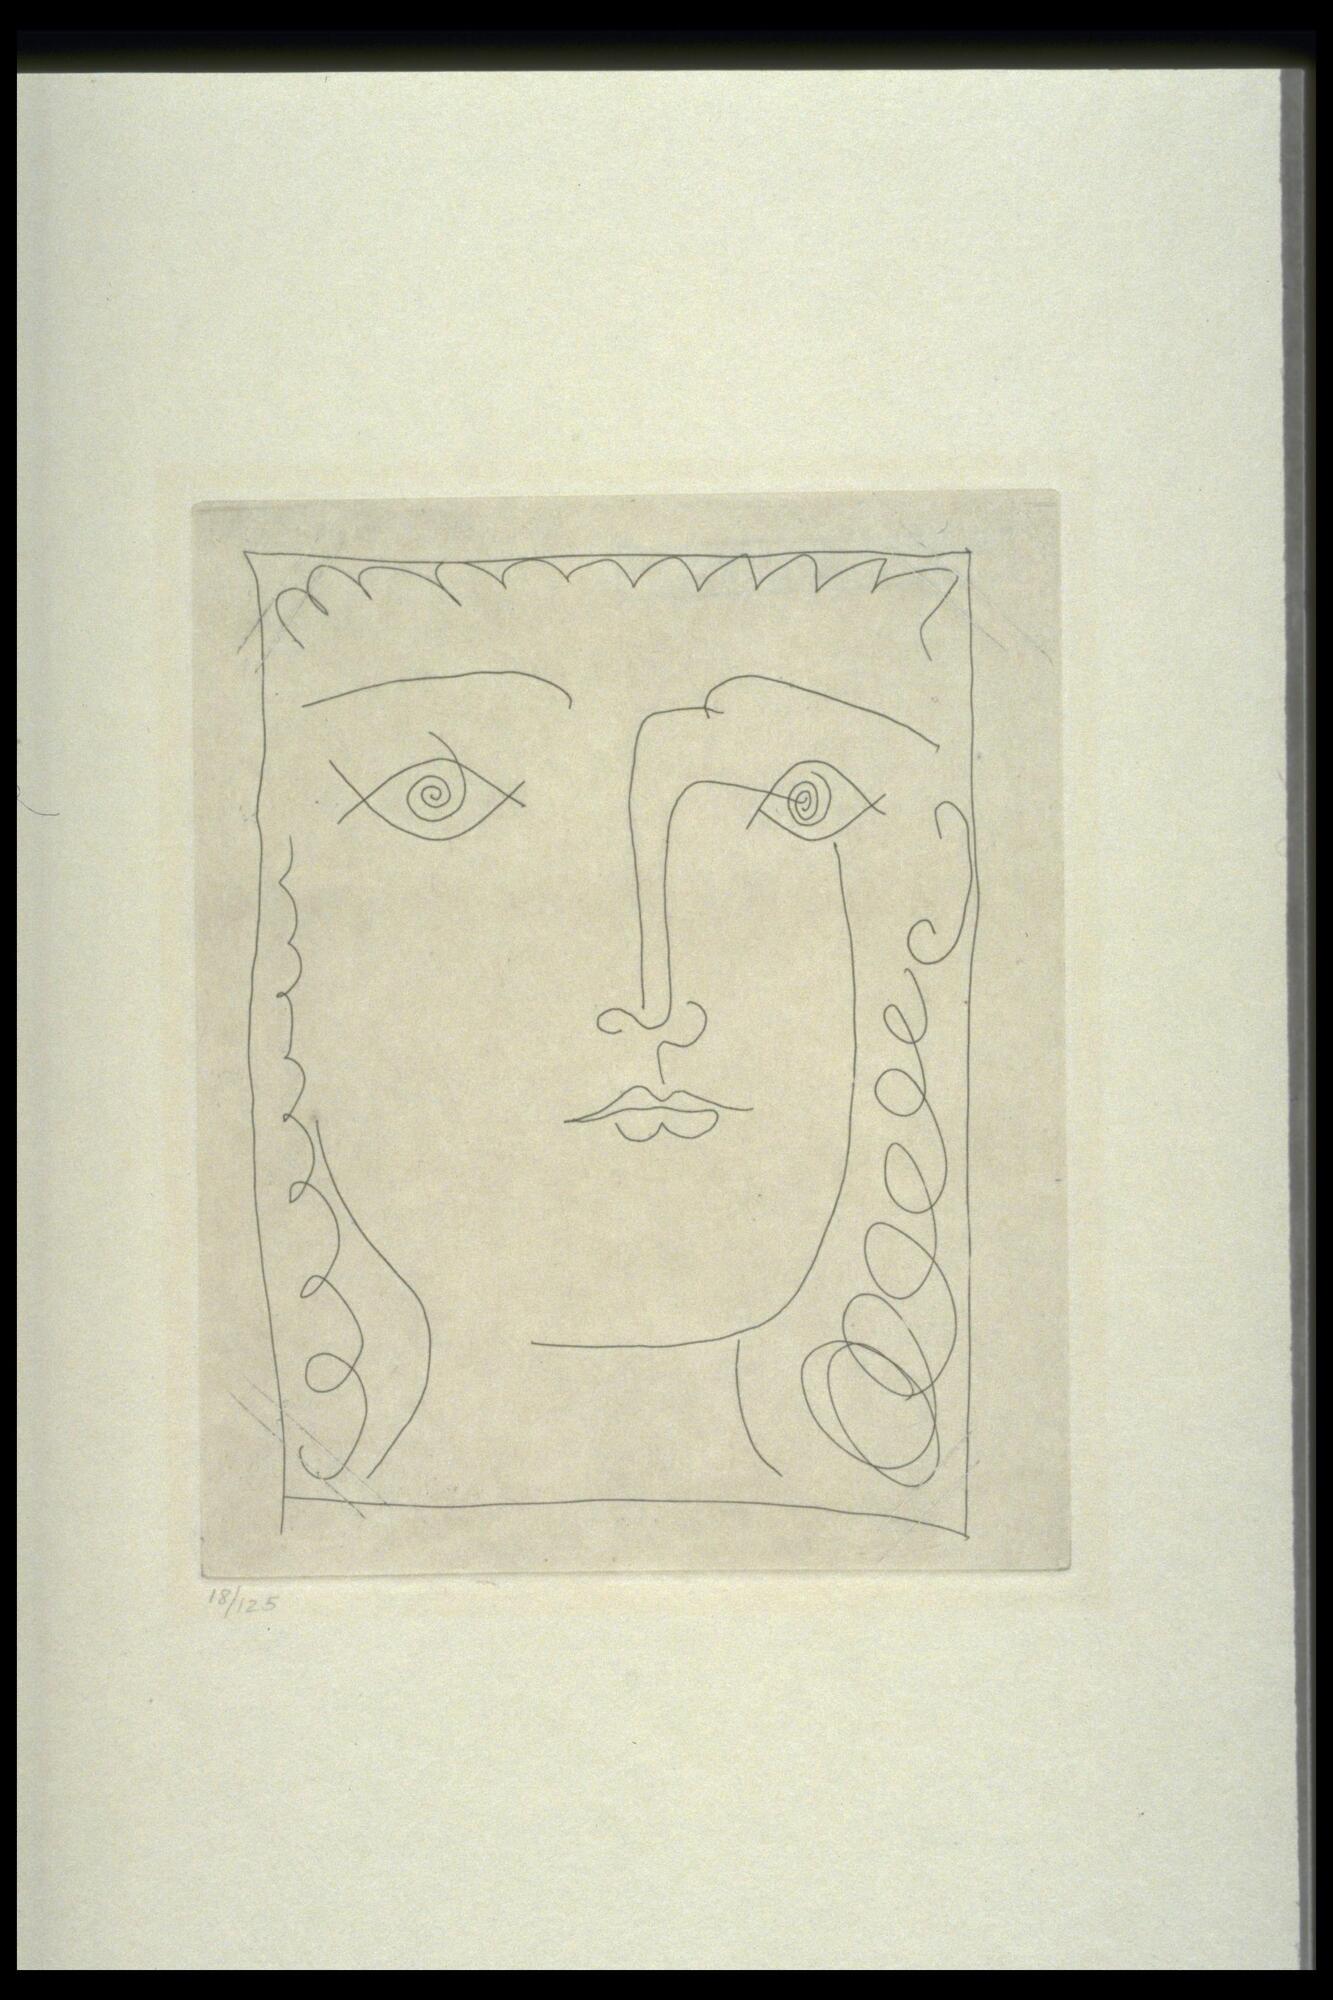 This etching is a line drawing of a girl's face, filling the entire frame. The girl has curly hair. There is a border drawn around her face.